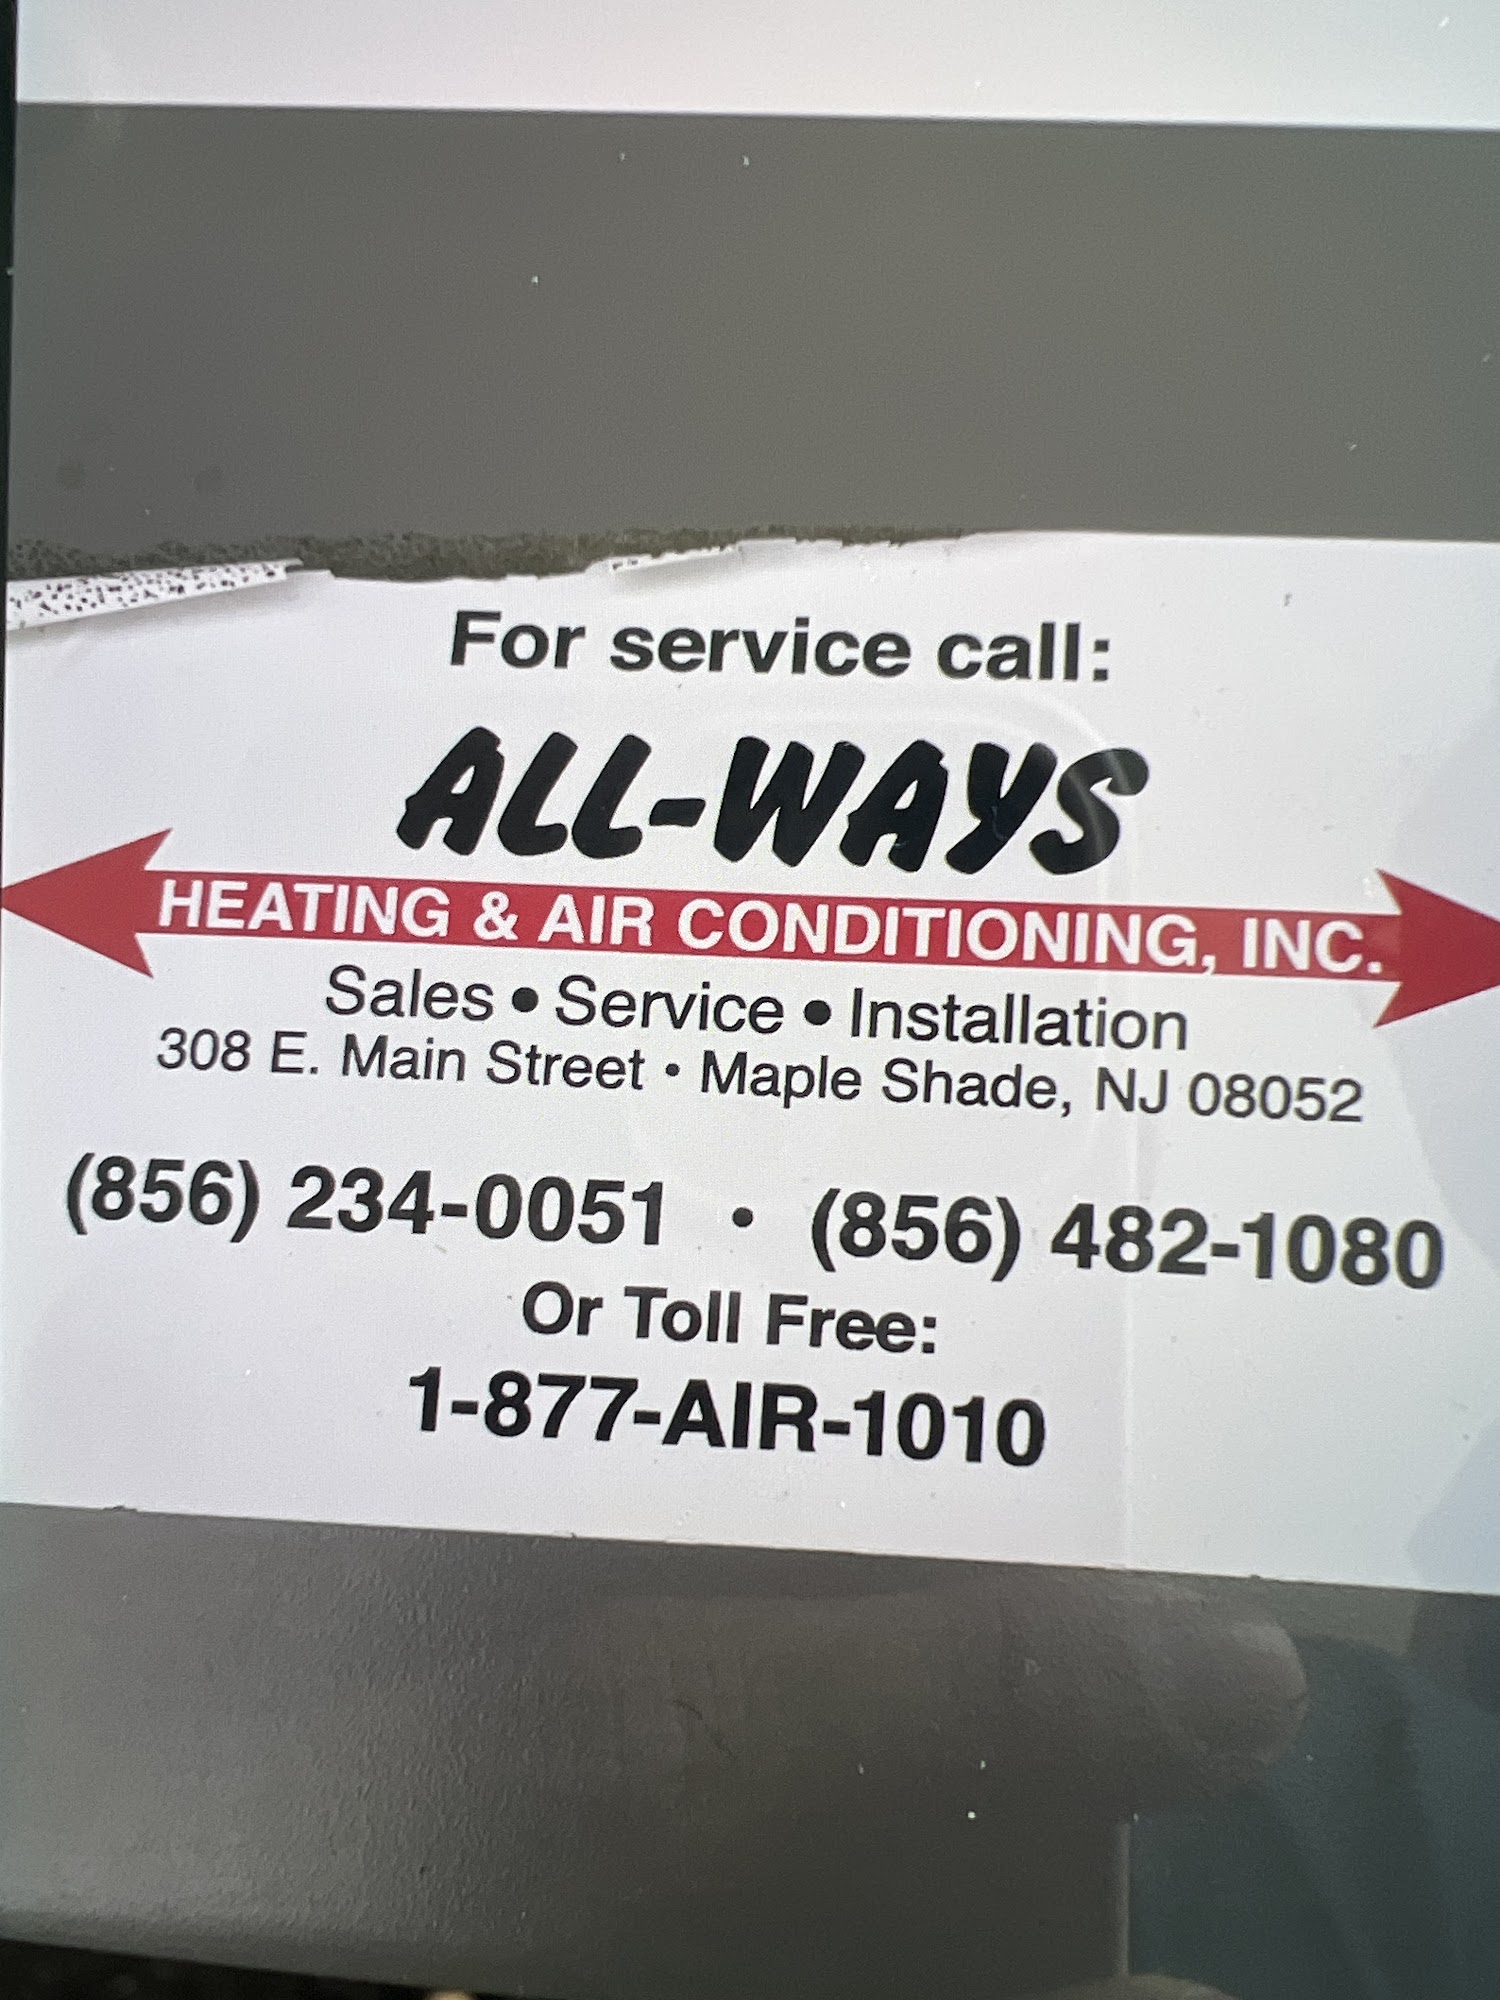 All-Ways Heating & Air Conditioning 308 E Main St, Maple Shade New Jersey 08052